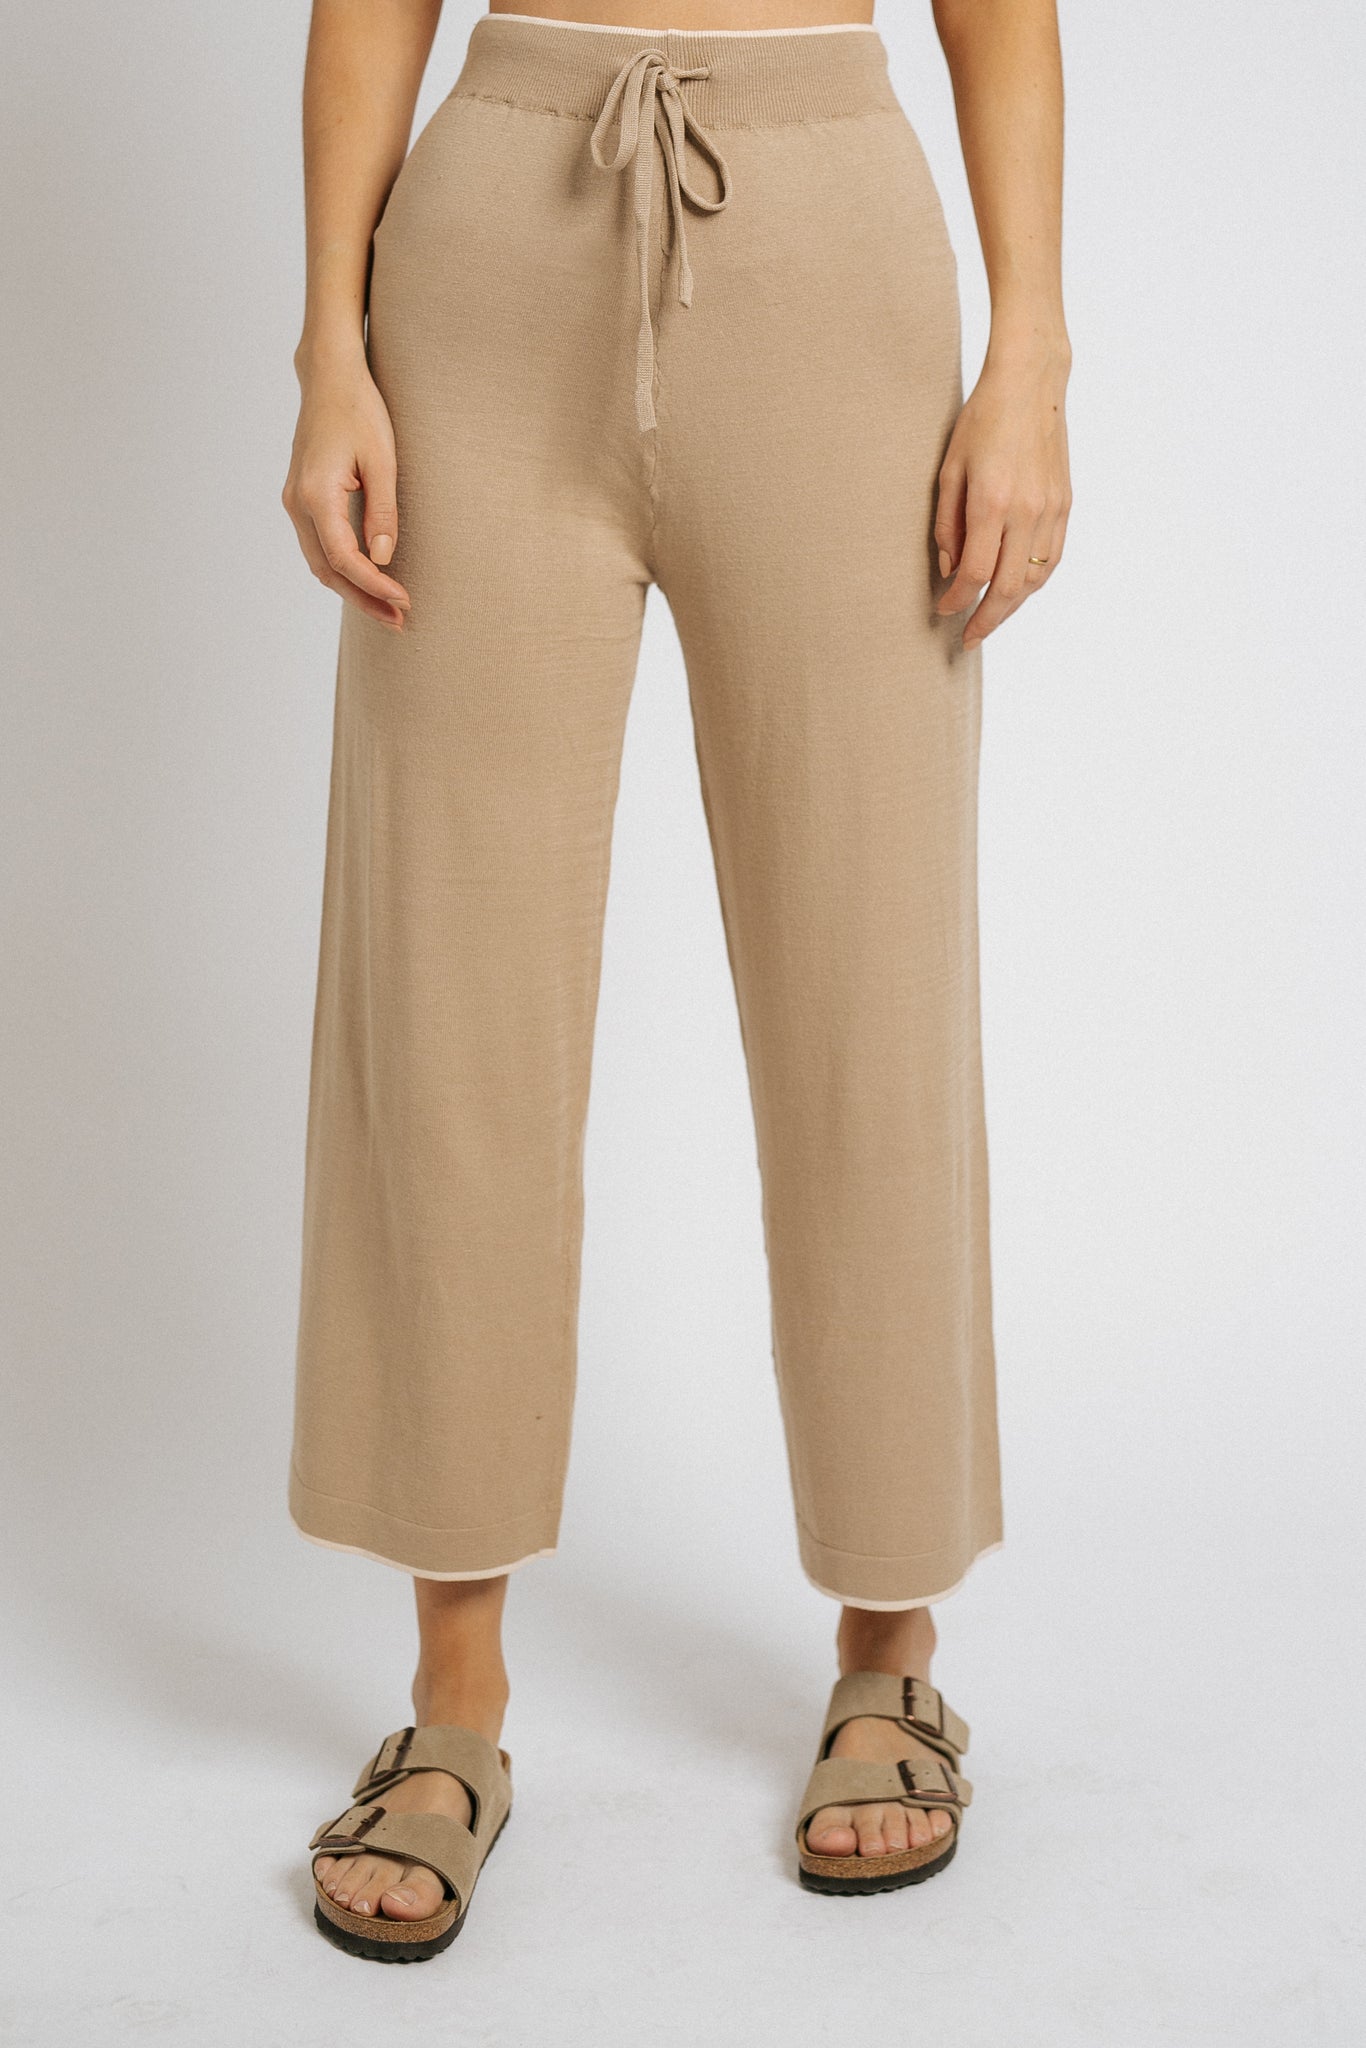 The Chateau Taupe Bottoms